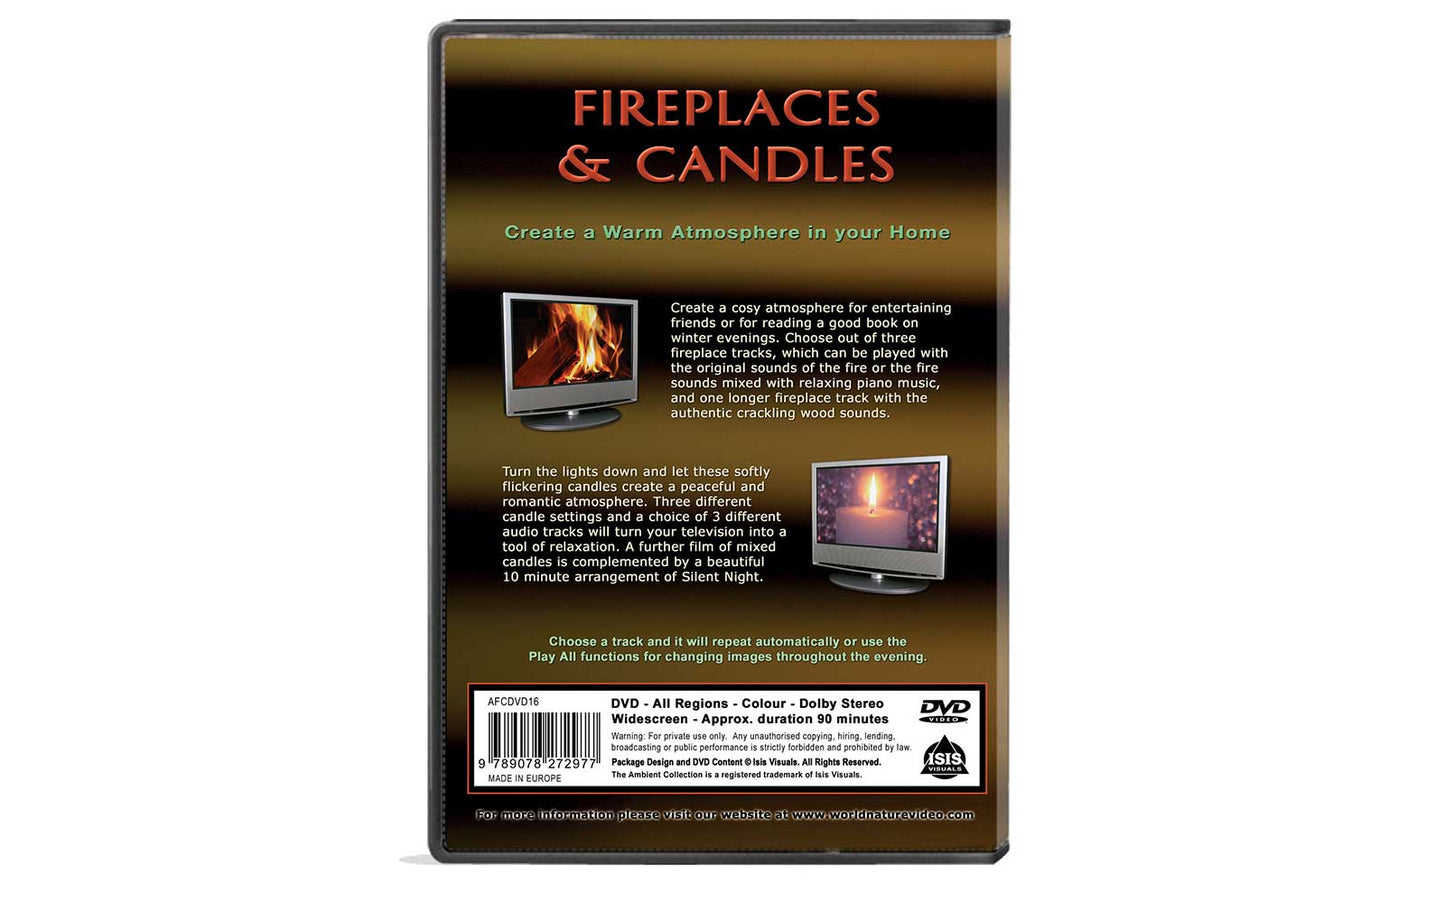 Fireplaces & Candles